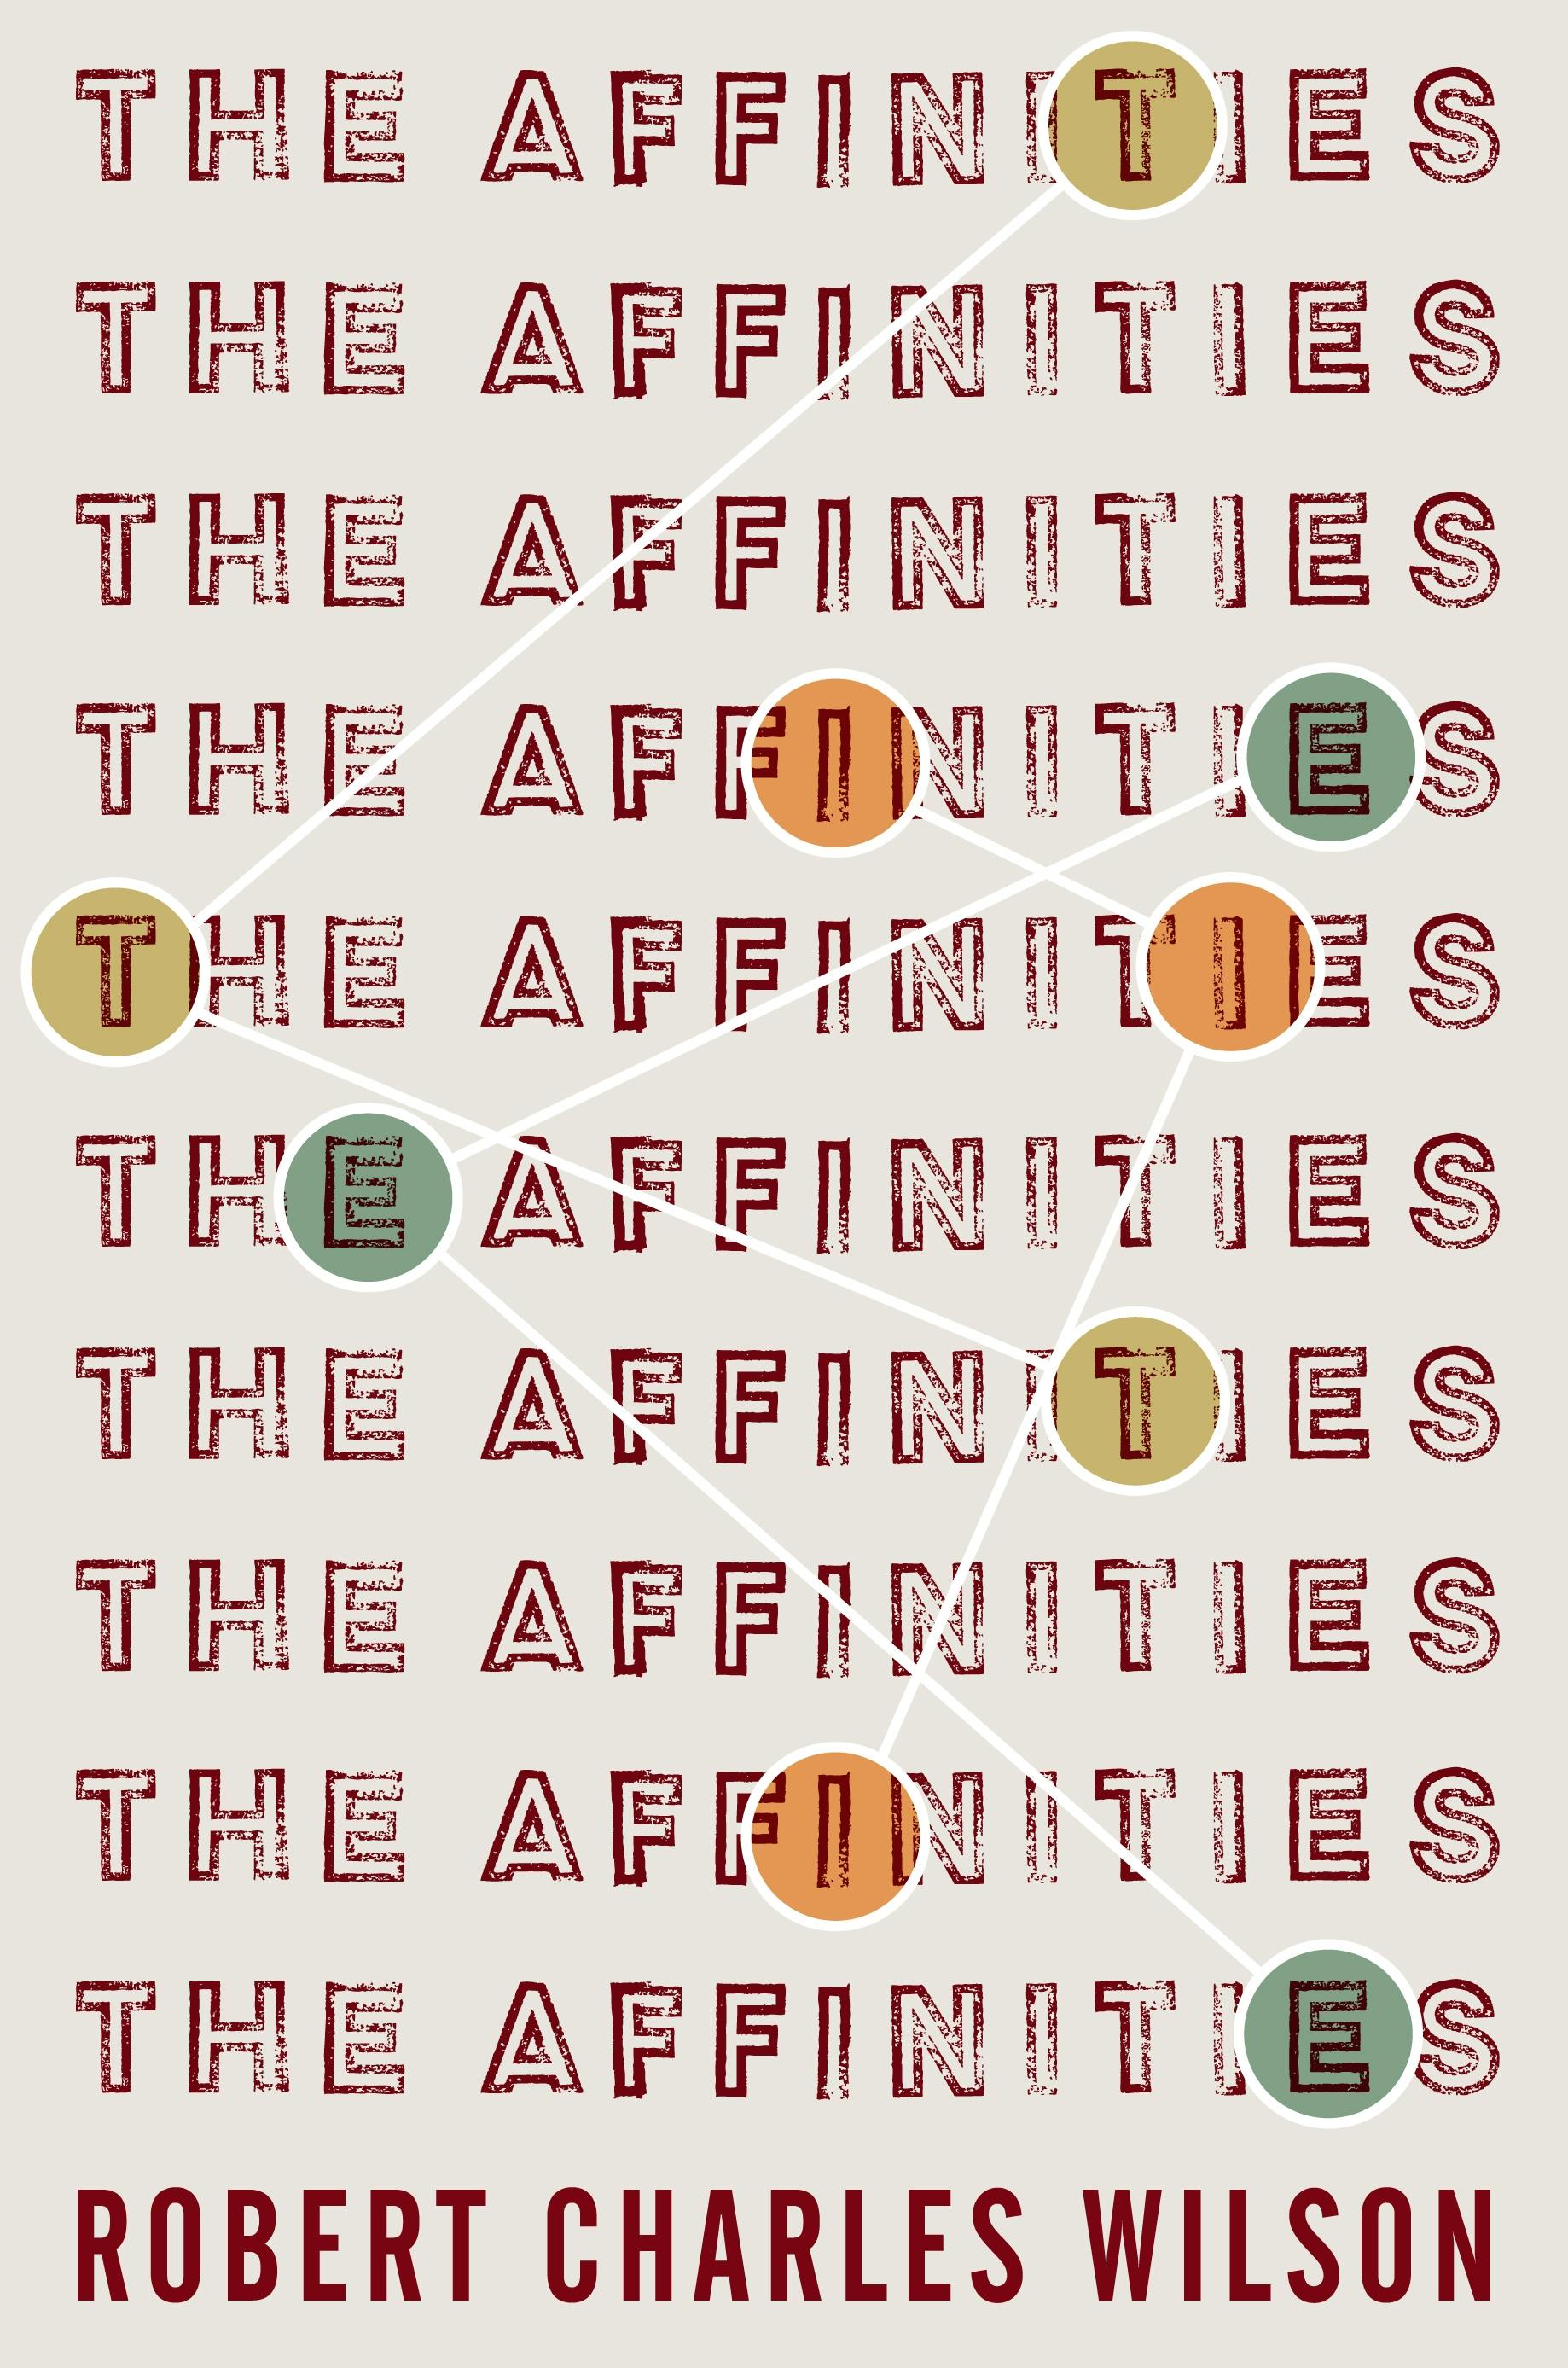 Cover for the book titled as: The Affinities